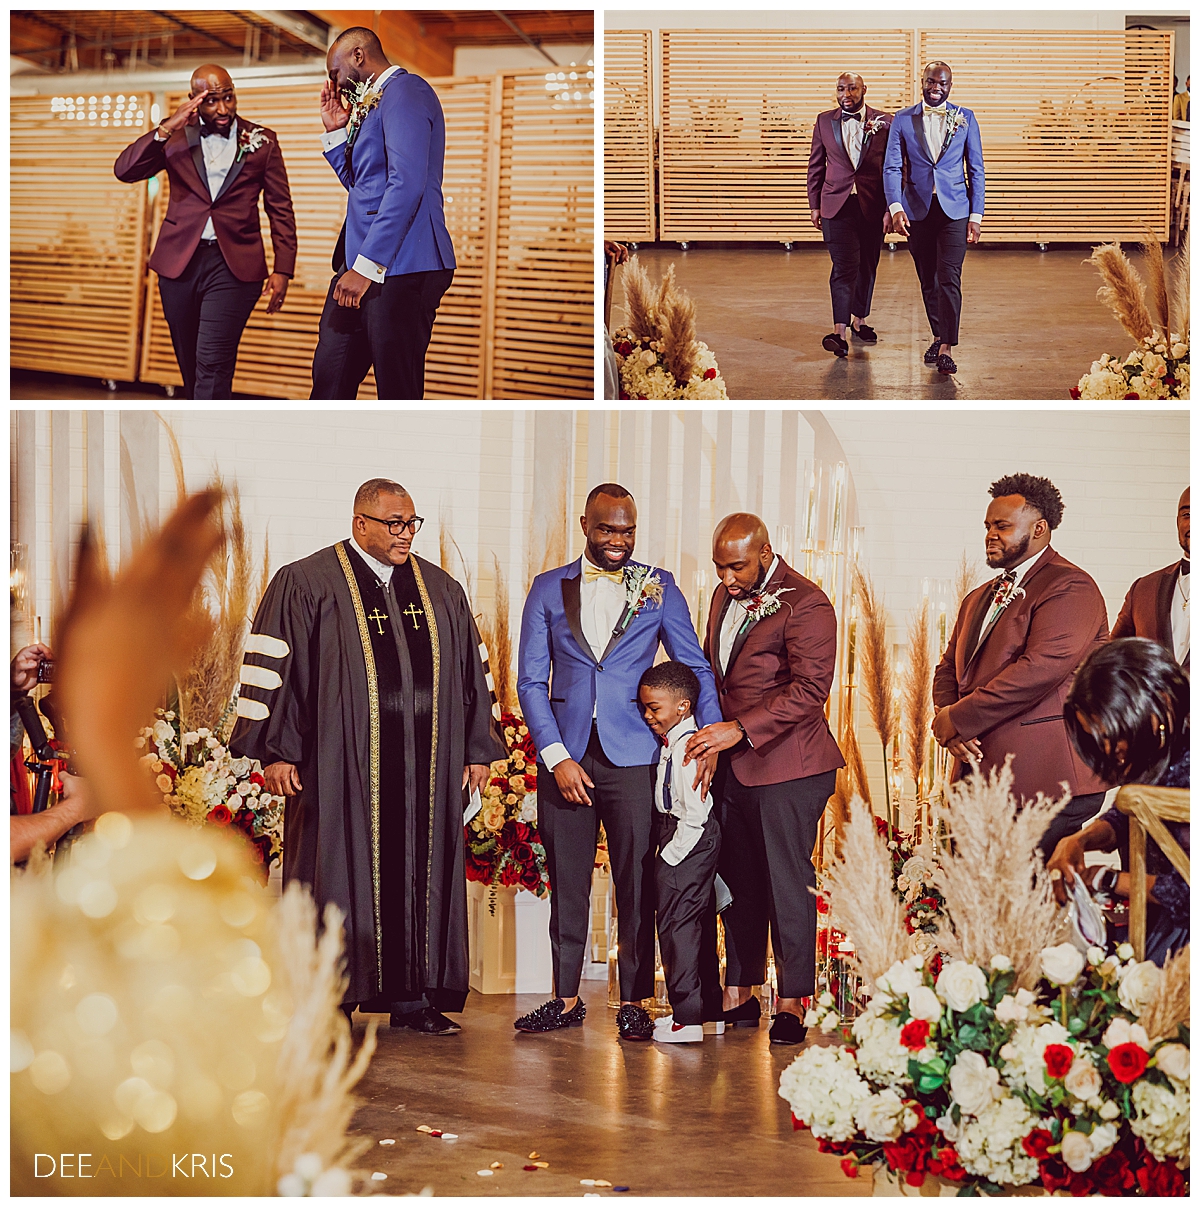 Three images: Top left image of Groom and best man saluting each other. Top right image of groom and best man walking down the aisle. Bottom image of groom standing at altar hugging ring bearer son with preacher and groomsmen looking on.